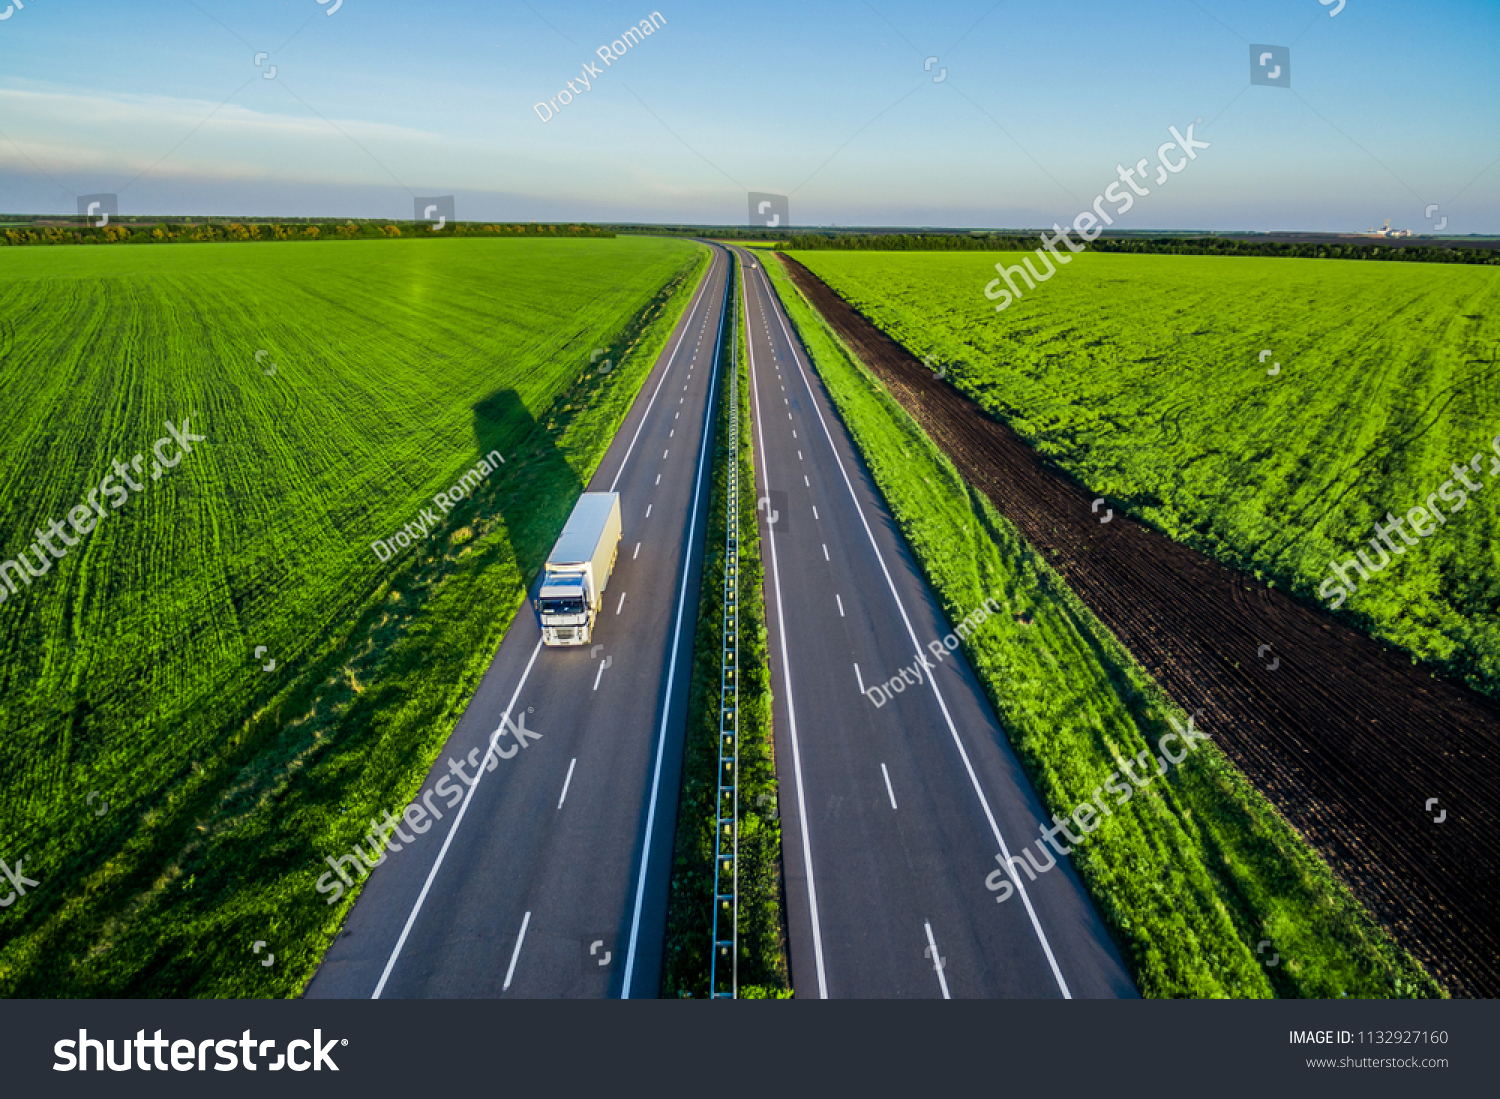 White trucks driving on asphalt road along the green fields in rural landscape. Road seen from the air. Aerial view landscape. shooting from a drone  #1132927160